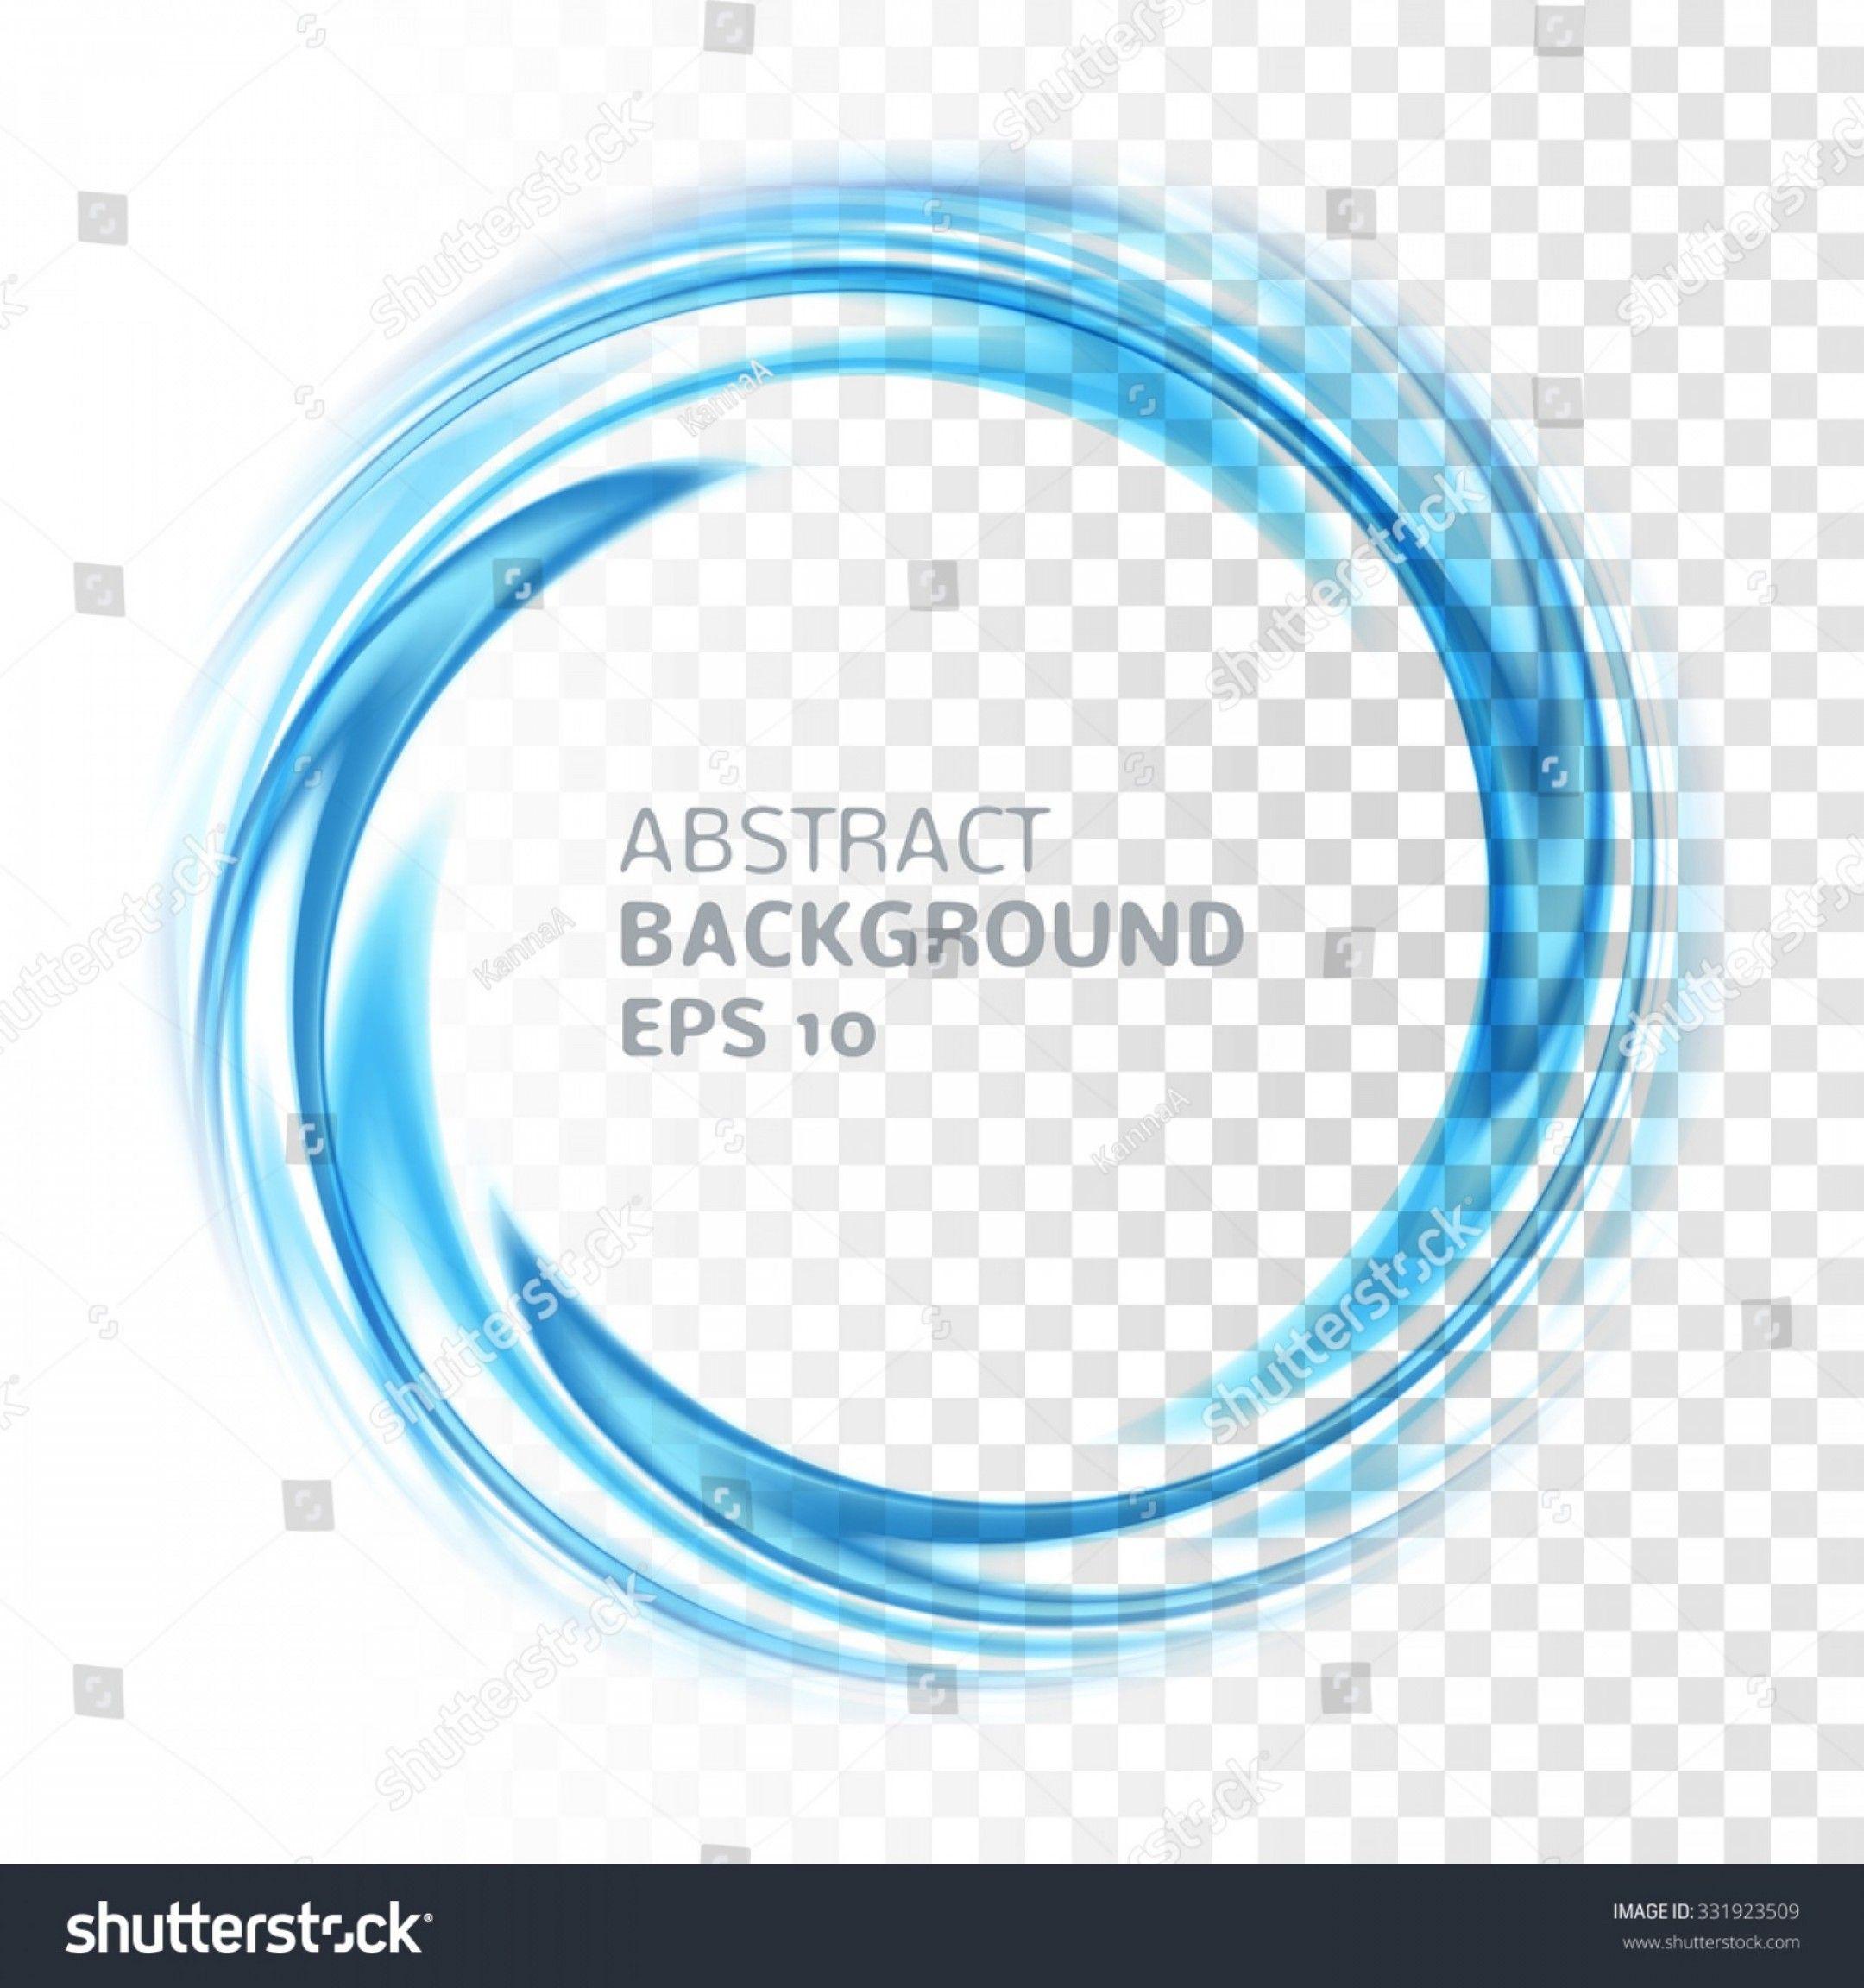 Blue and White Swirl Logo - Abstract Blue Swirl Circle On Transparent